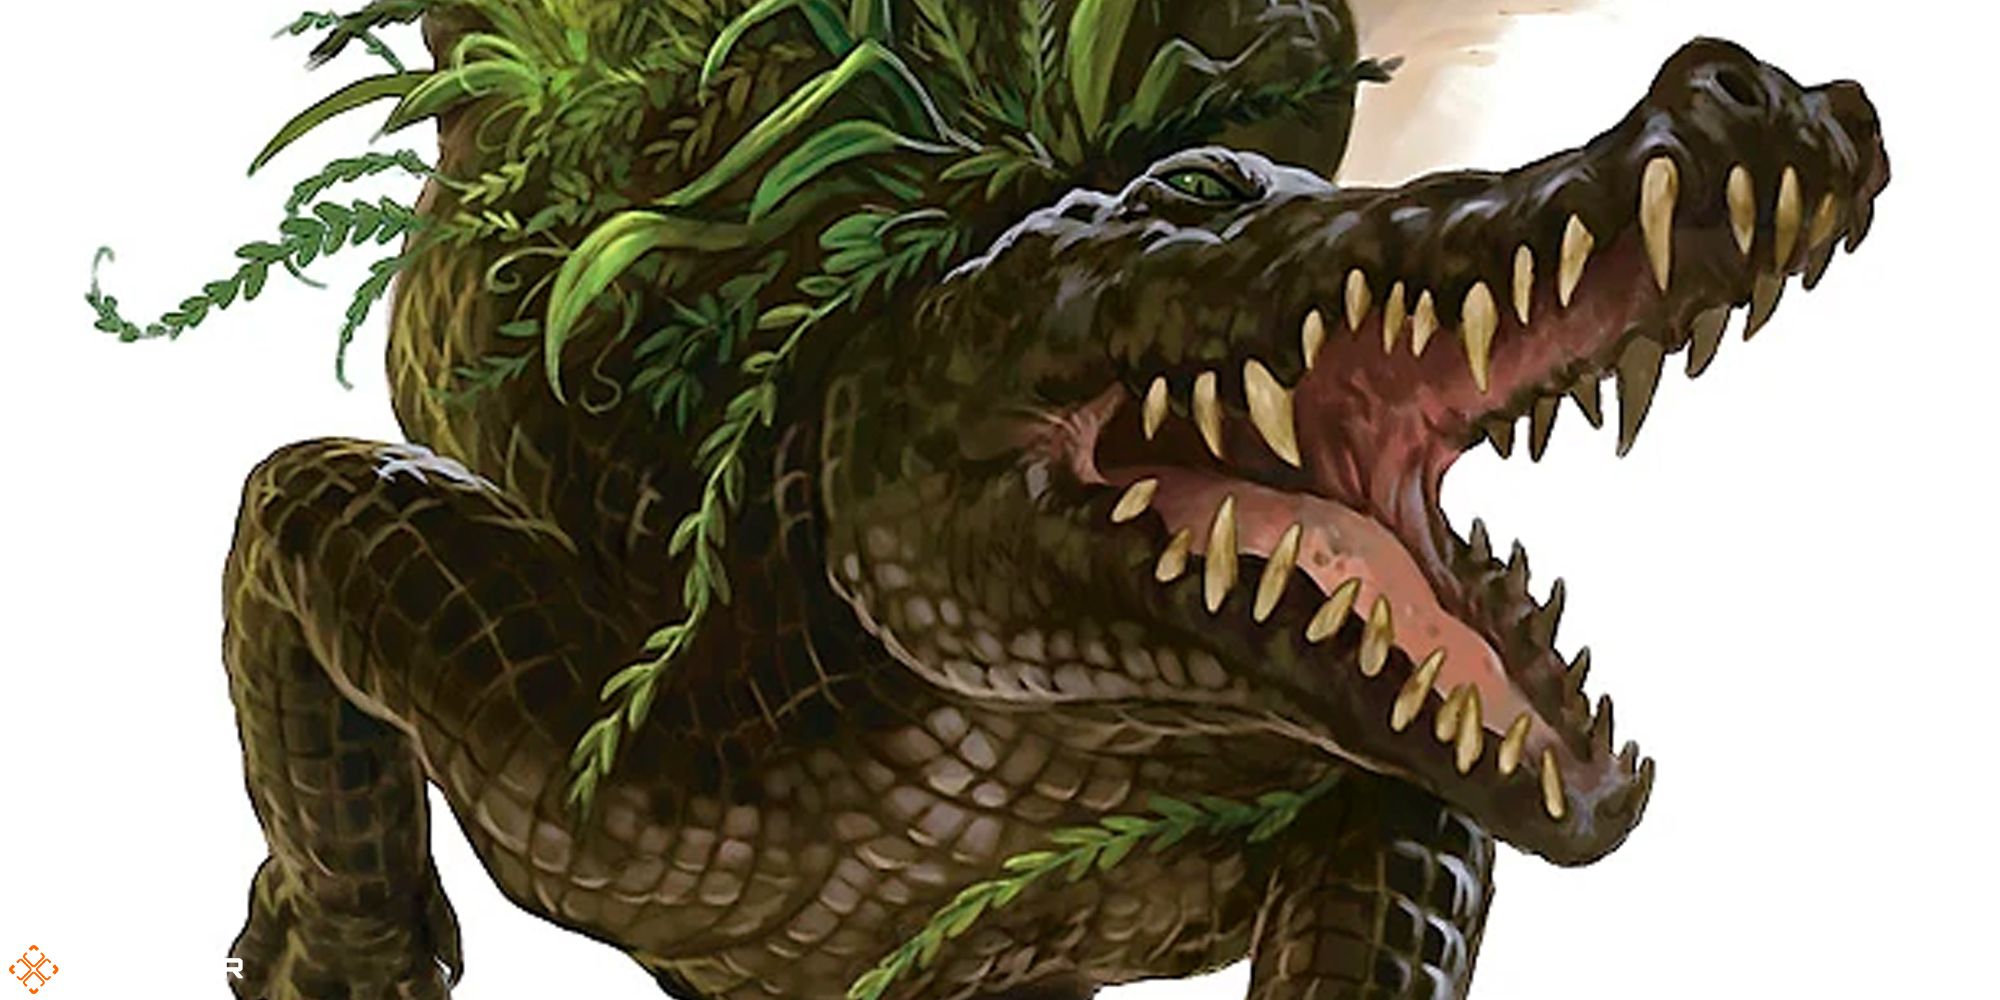 Dungeons and Dragons - official art of a crocodile (4e)